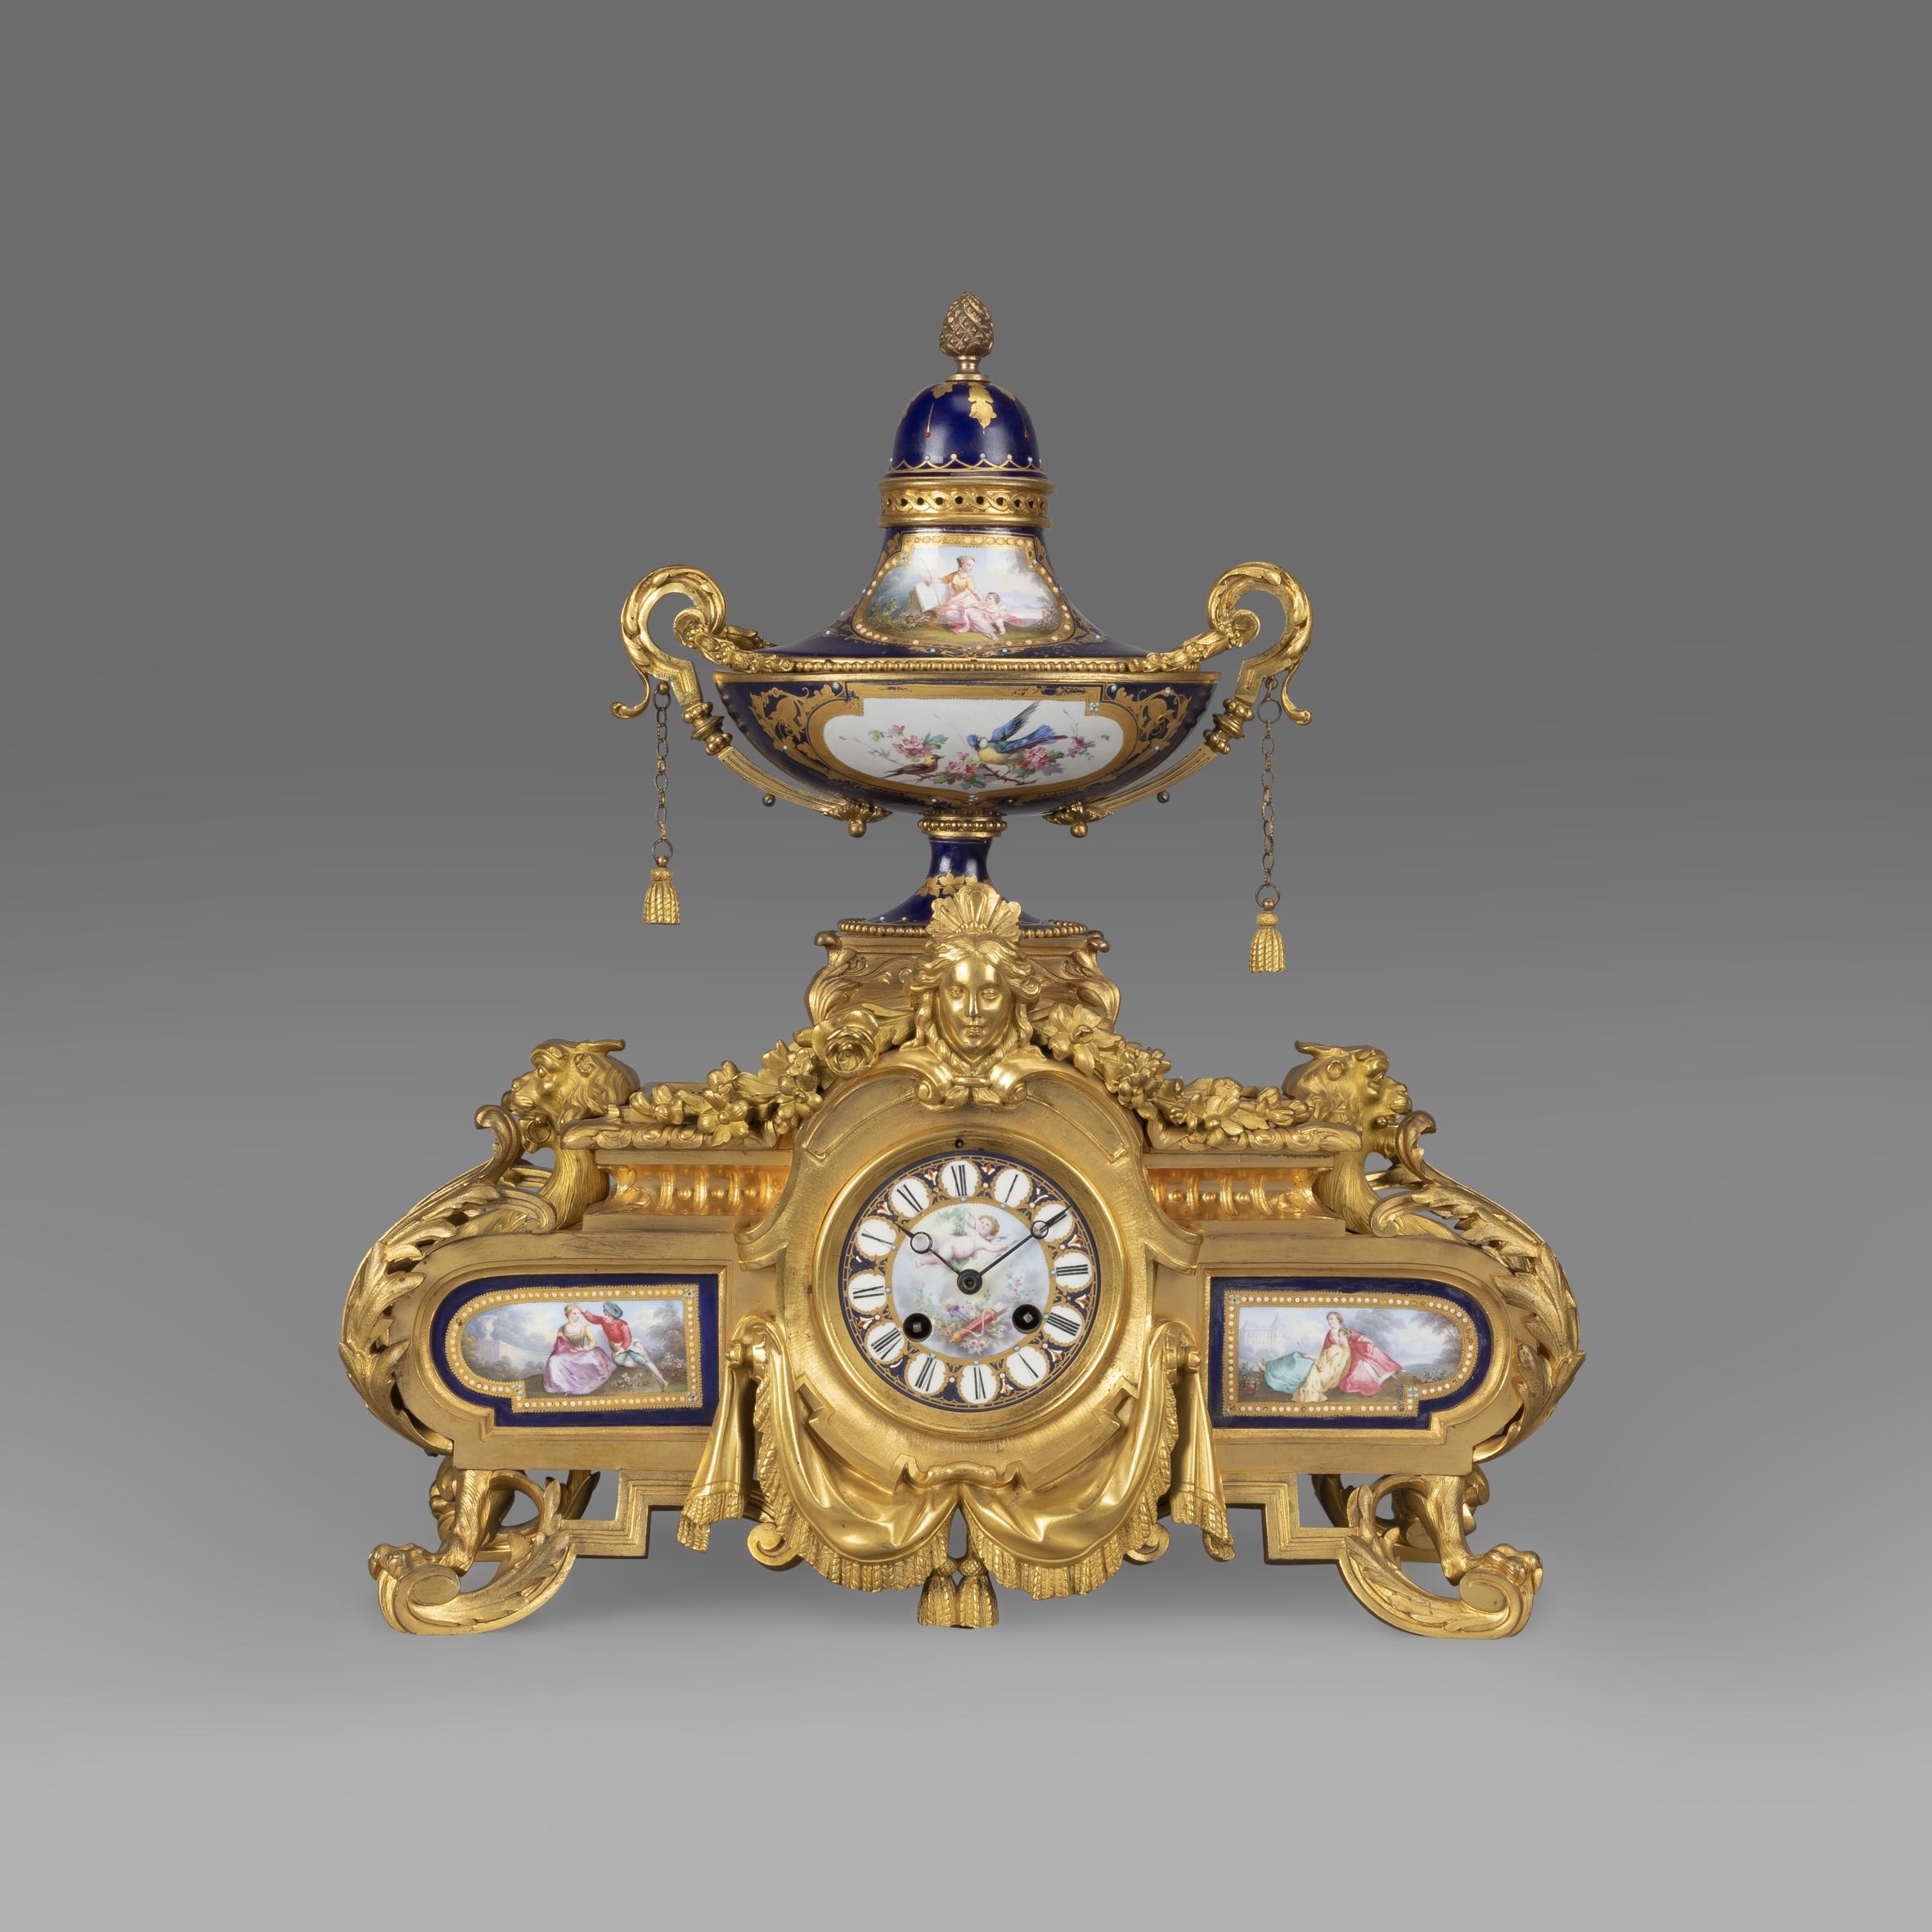 A fine Napoleon III gilt-bronze and porcelain mounted clock garniture, designed by Louis-Constant Sévin, cast by Ferdinand Barbedienne, The Movement by Japy Frères.

Frédéric Japy (1749-1812) was apprenticed in Montbeliard to his clockmaker uncle,